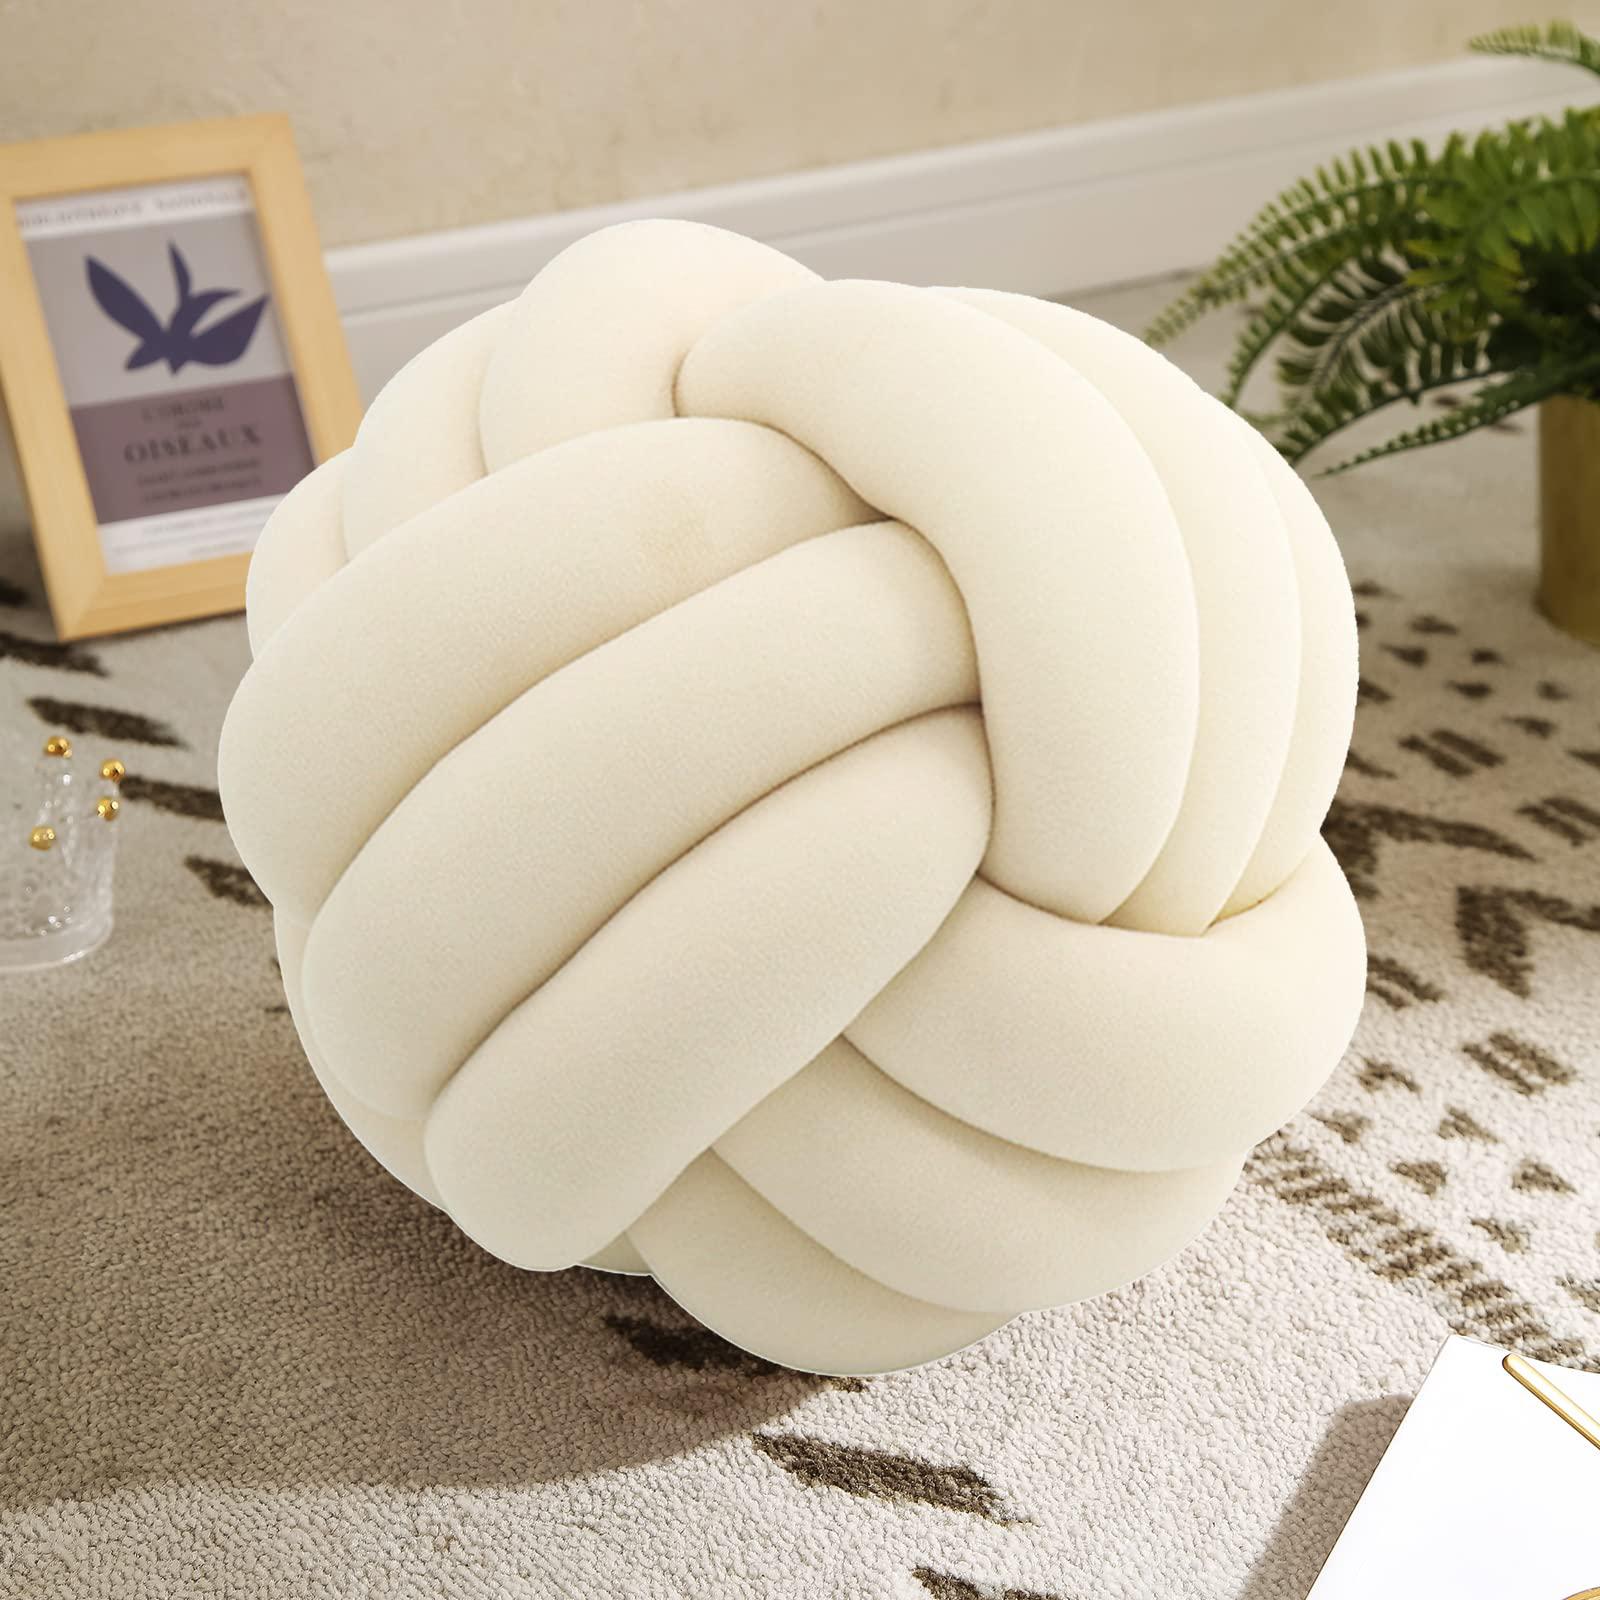 KUCCO-PILLOW knot pillow ball-shaped decorative throw pillows,ivory 20cm cute couch cushion knotted plush pillow suitable for living room 